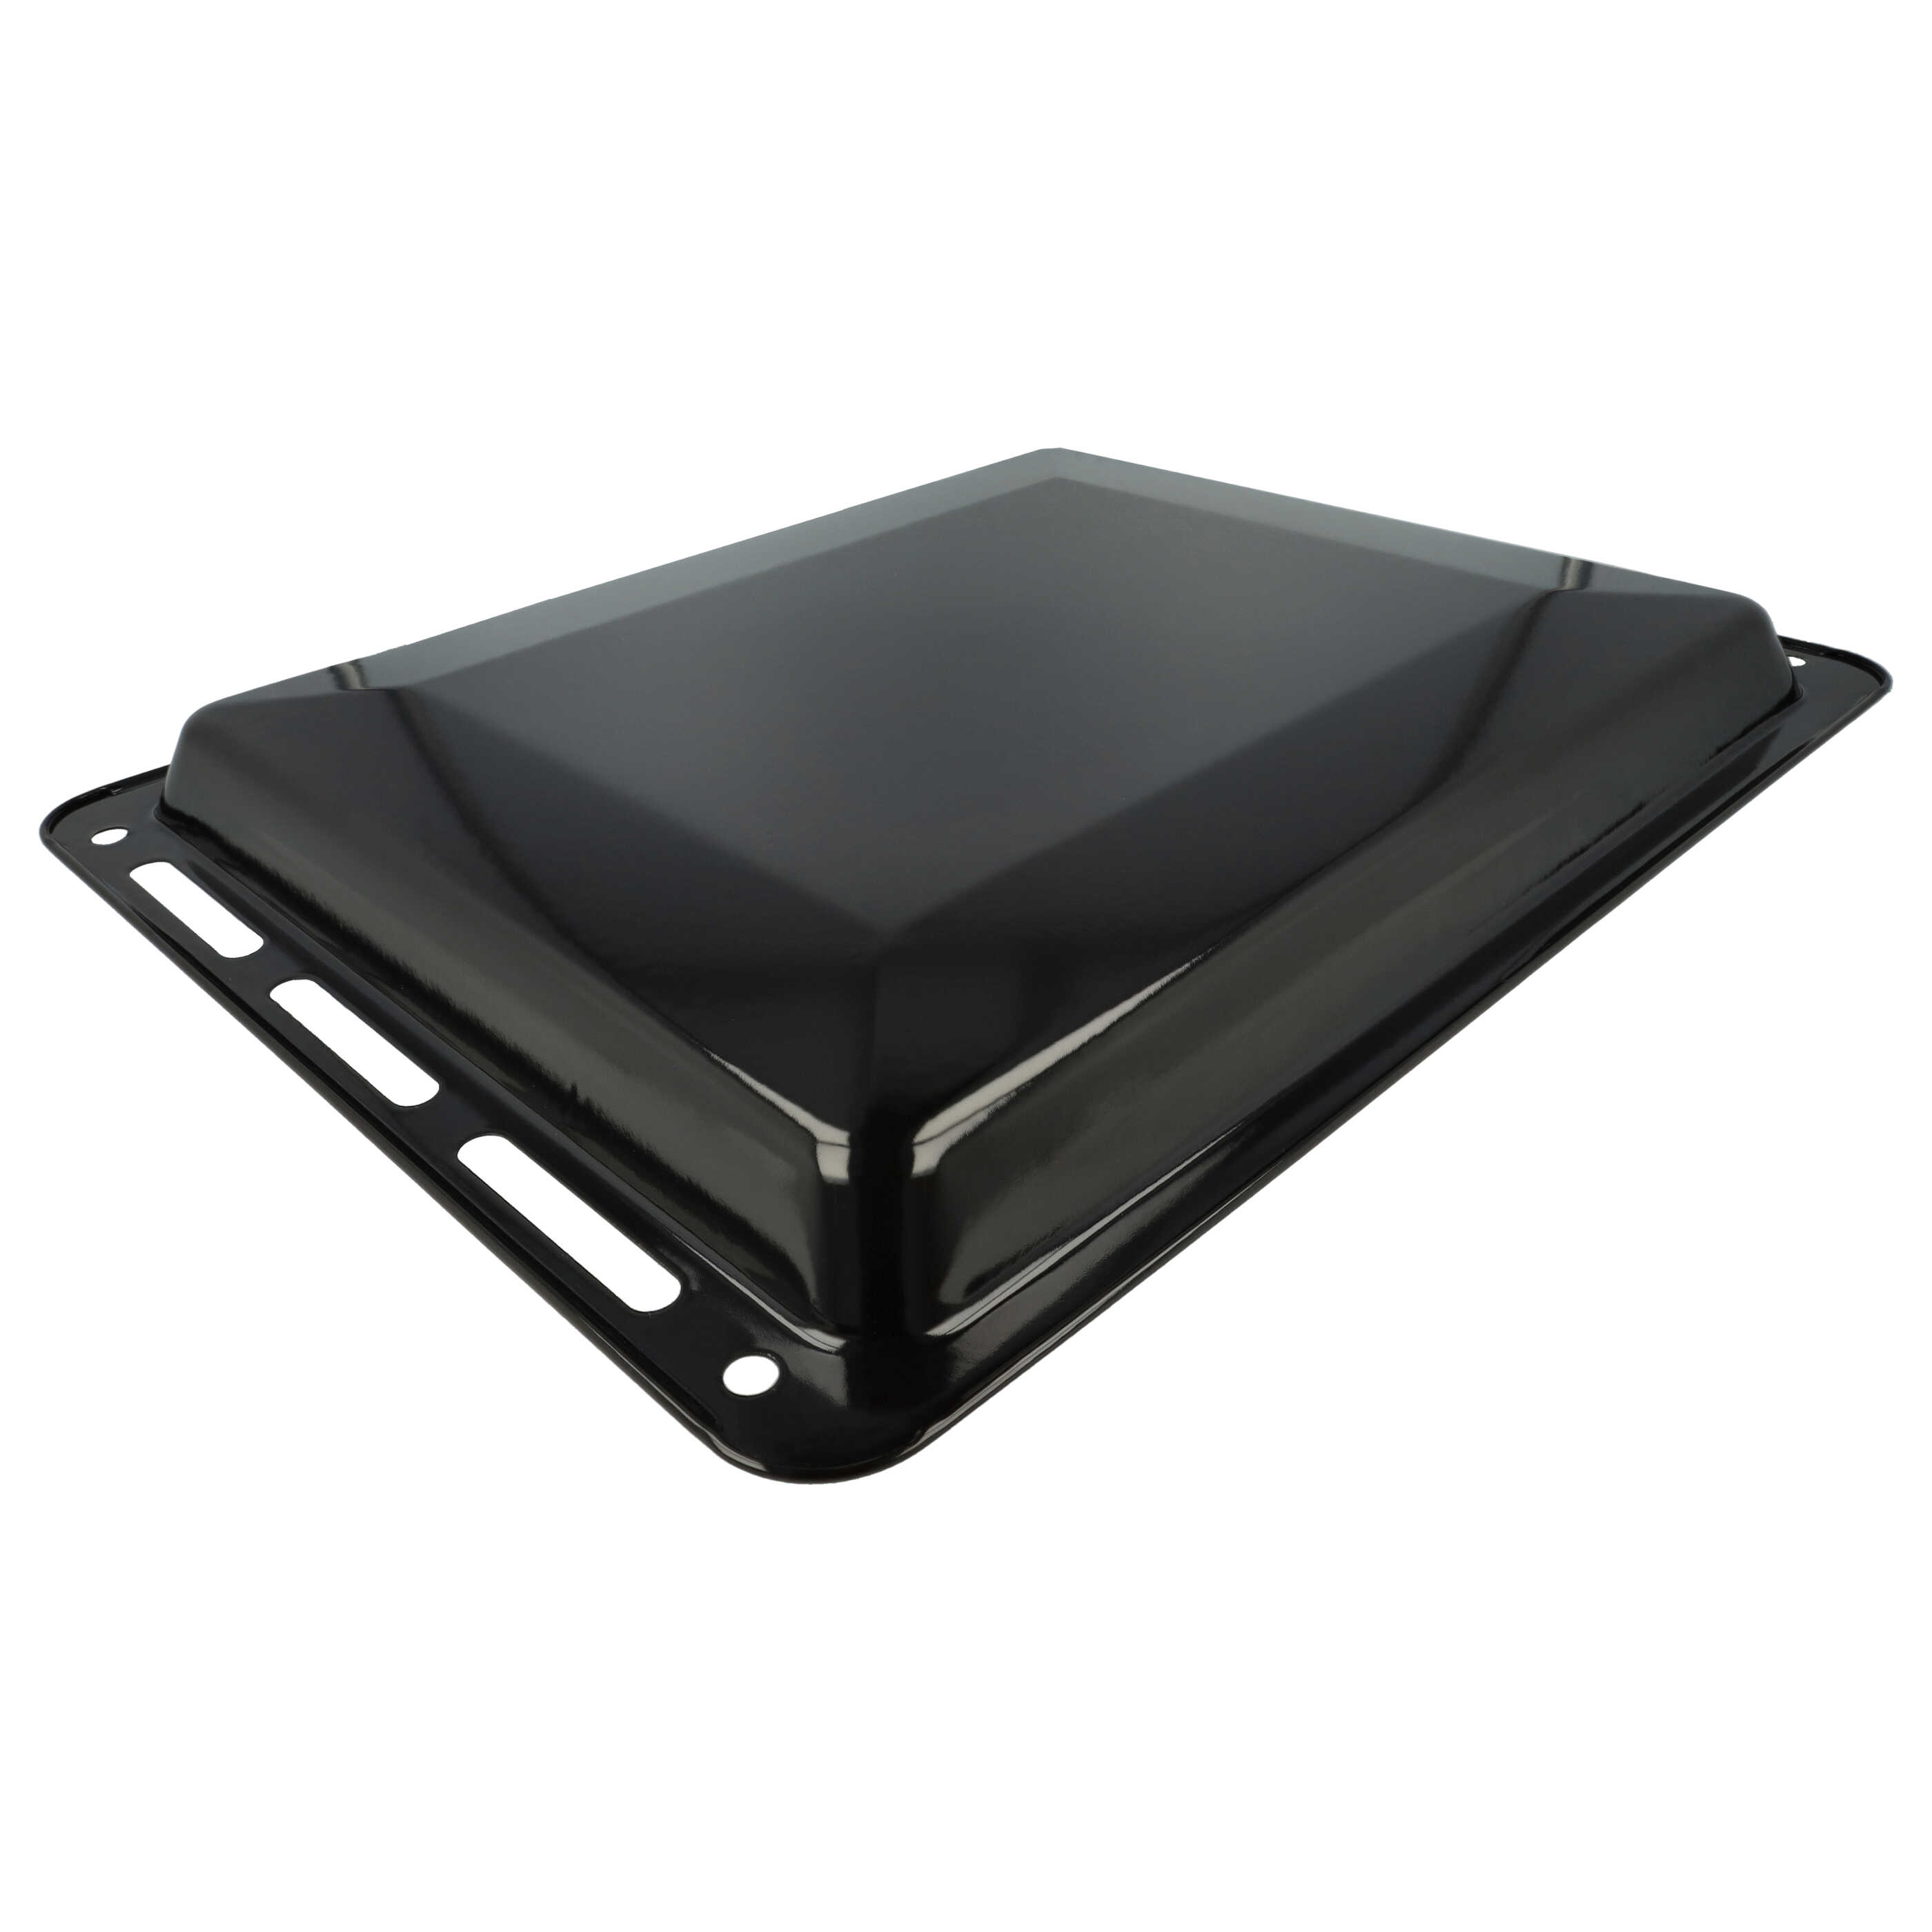 Baking Tray as Replacement for Bosch 434176, 00742635, 00662999, 435847, 434178 Oven - 44.5 x 37.5 x 4.4 cm